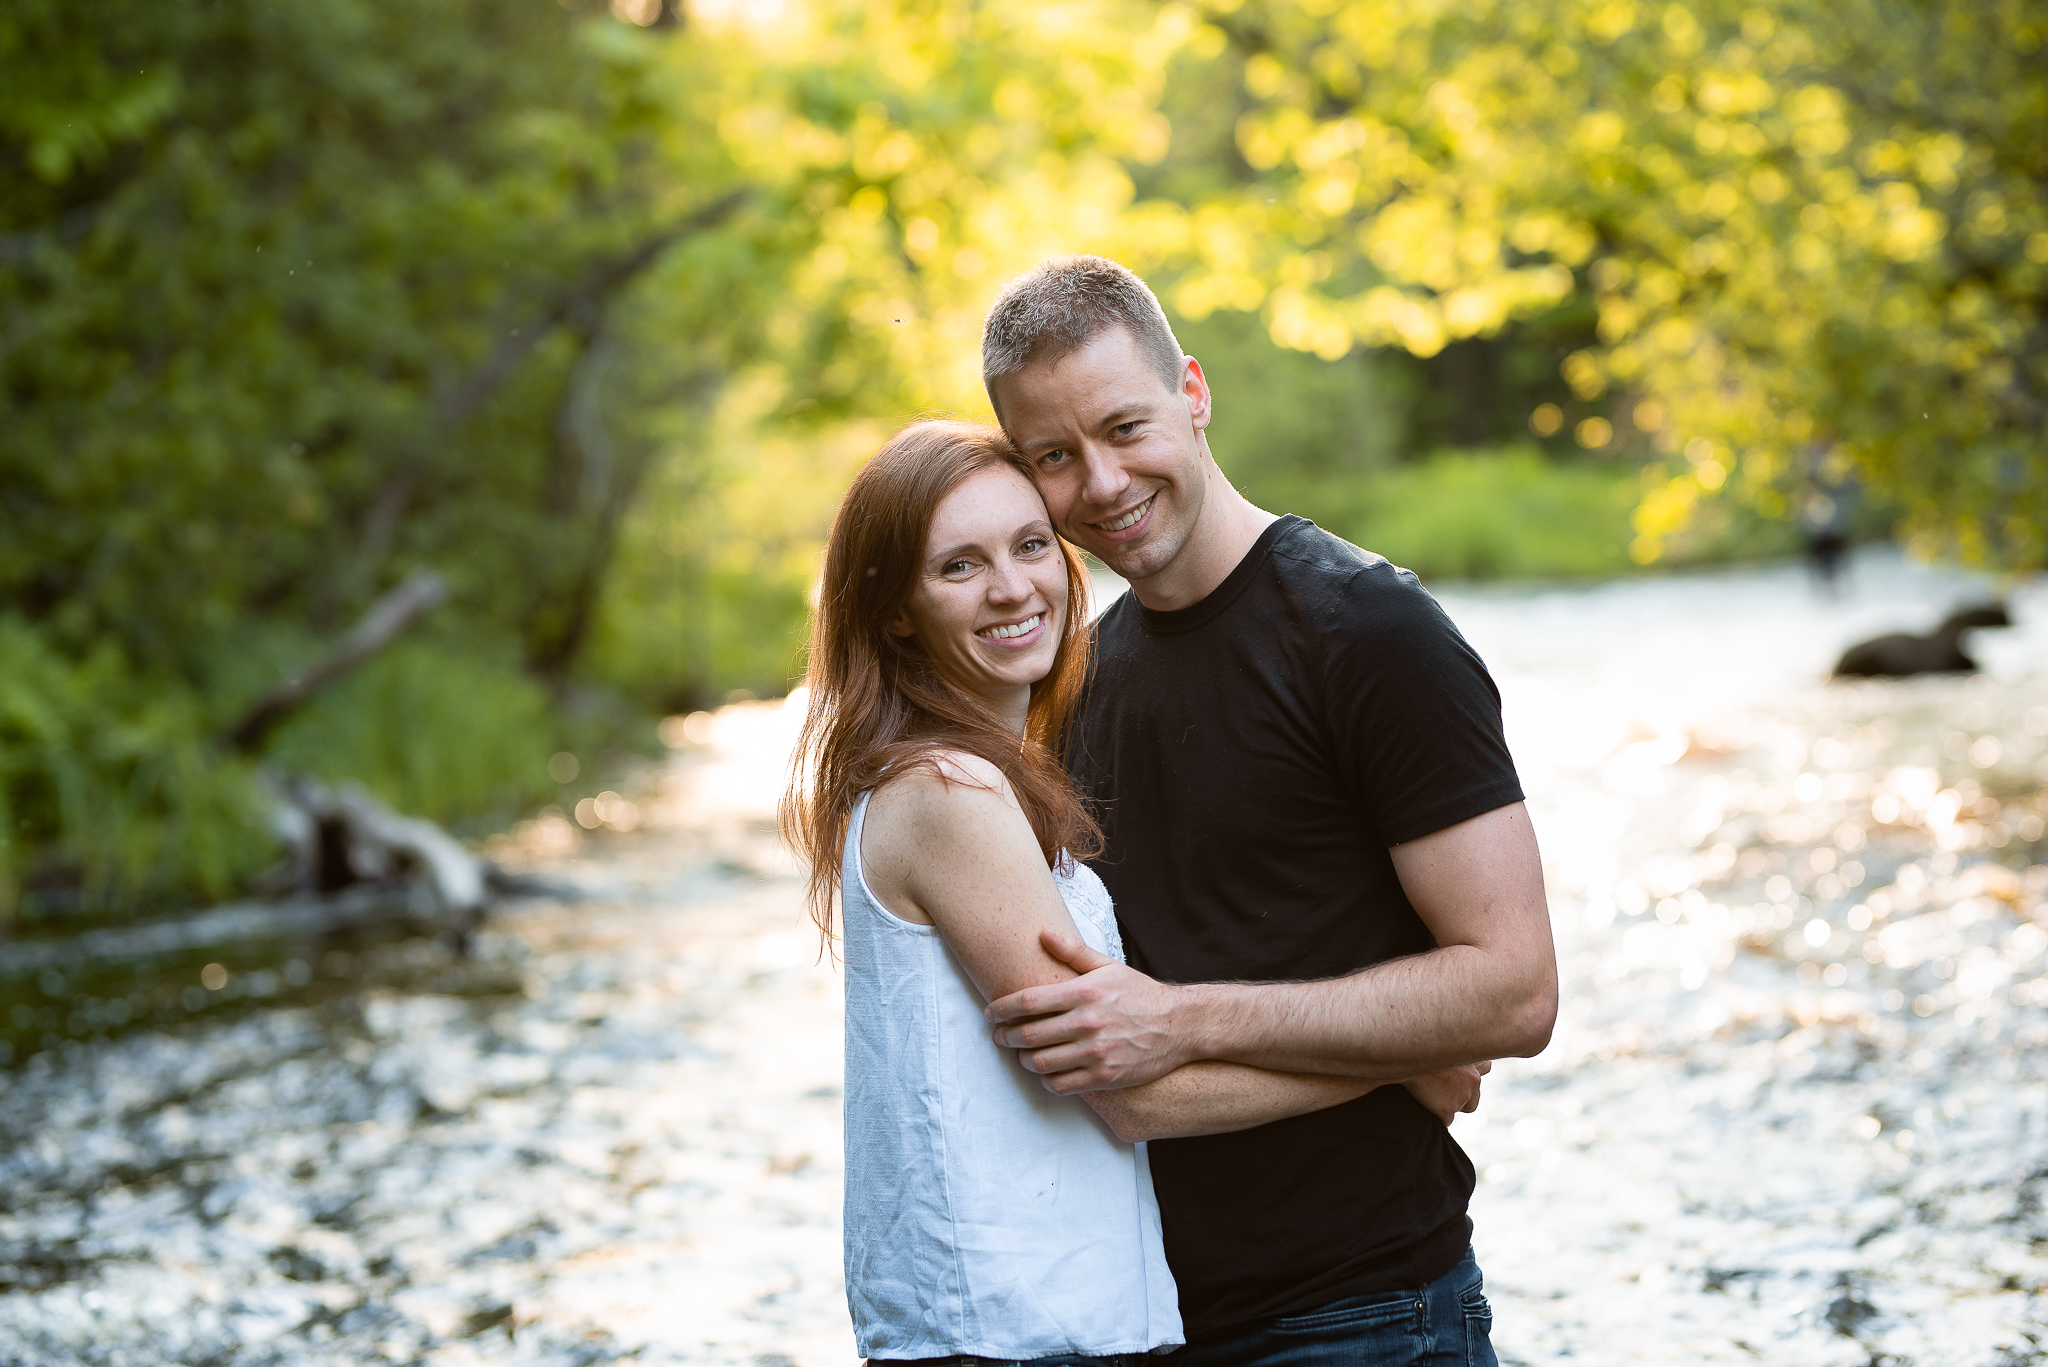 Couples423NaomiLuciennePhotography062019-Edit.jpg